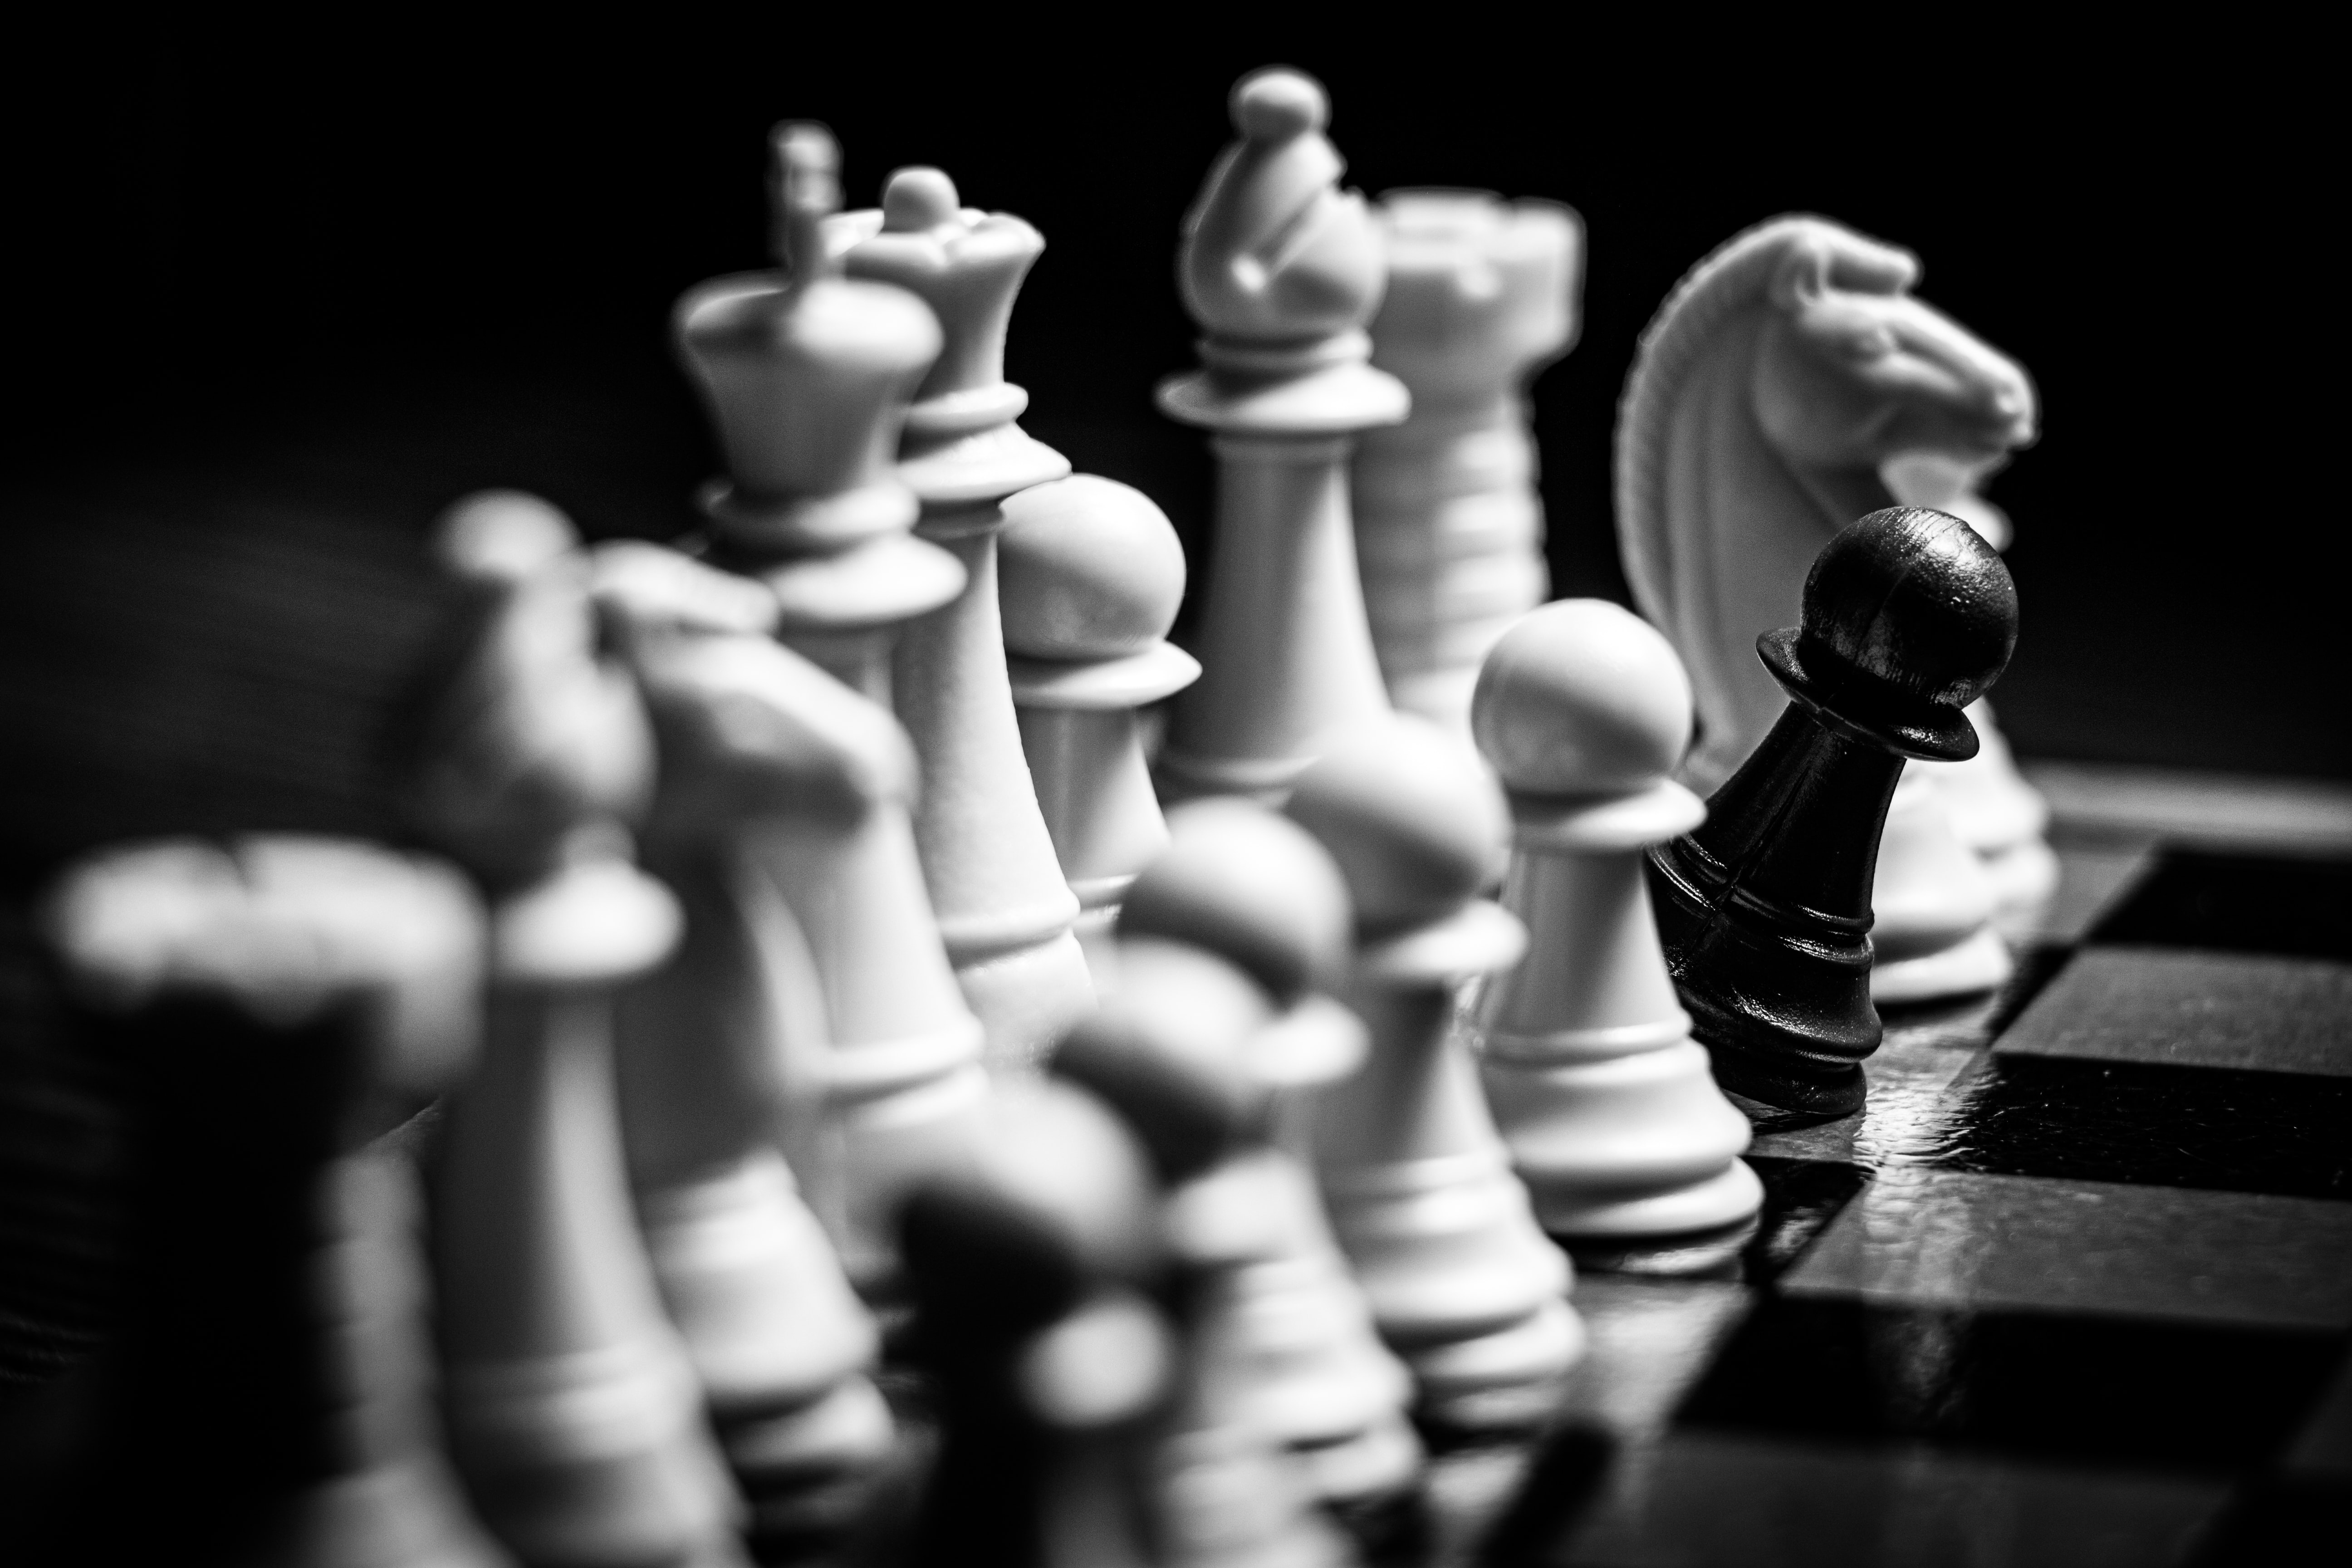 Ultrawide Wallpapers Games shape, game, chess, shapes